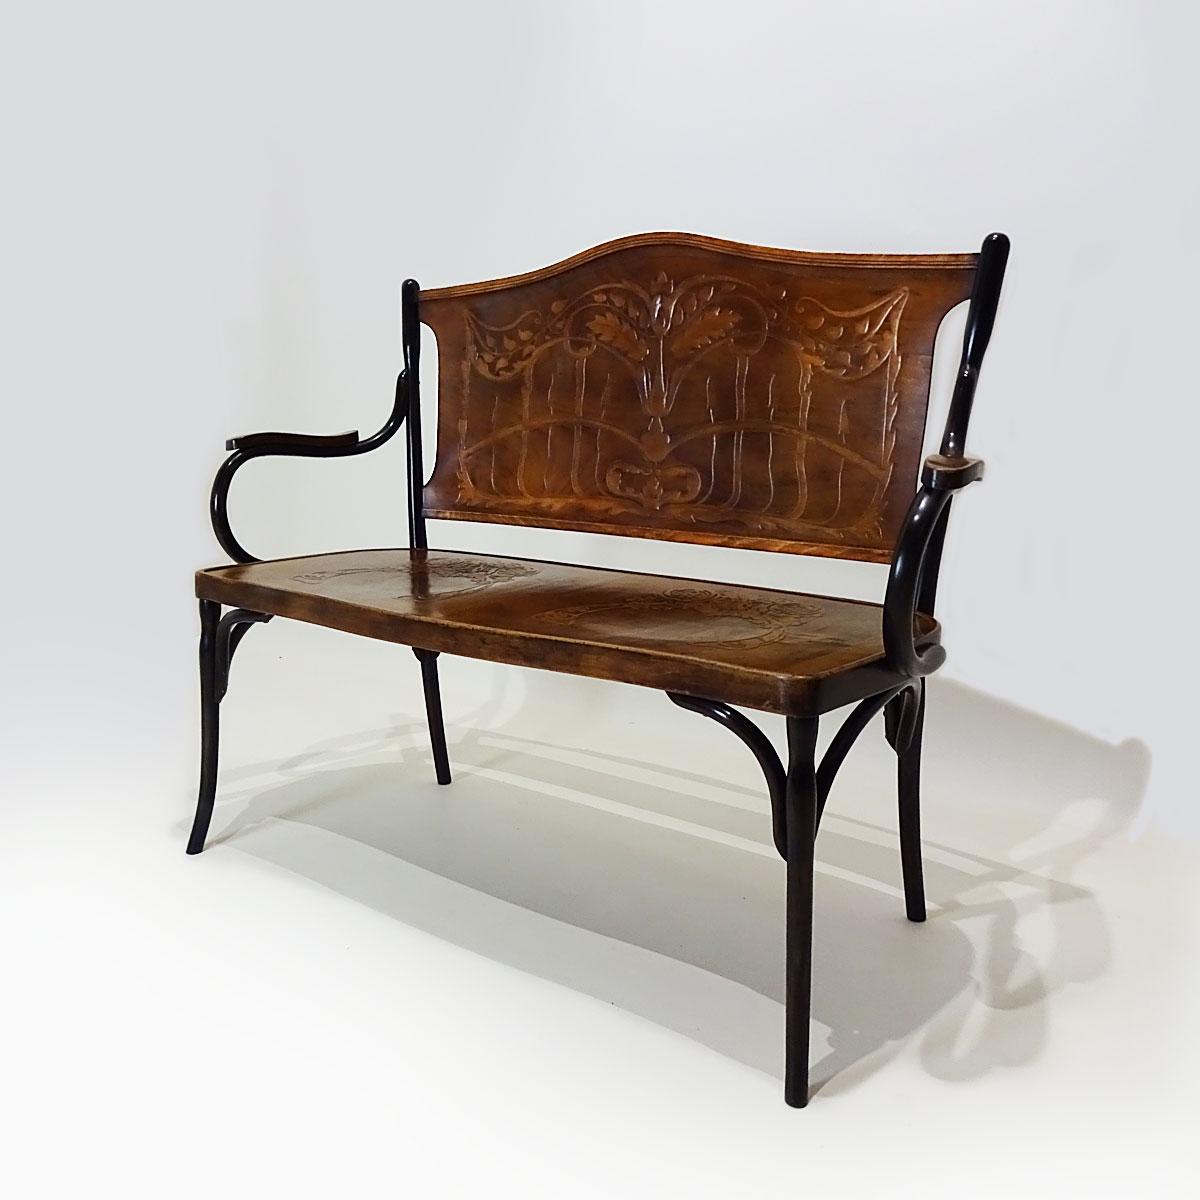 Vienna Secession Antique Embossed Bentwood Bench Attributed to Jacob and Josef Kohn